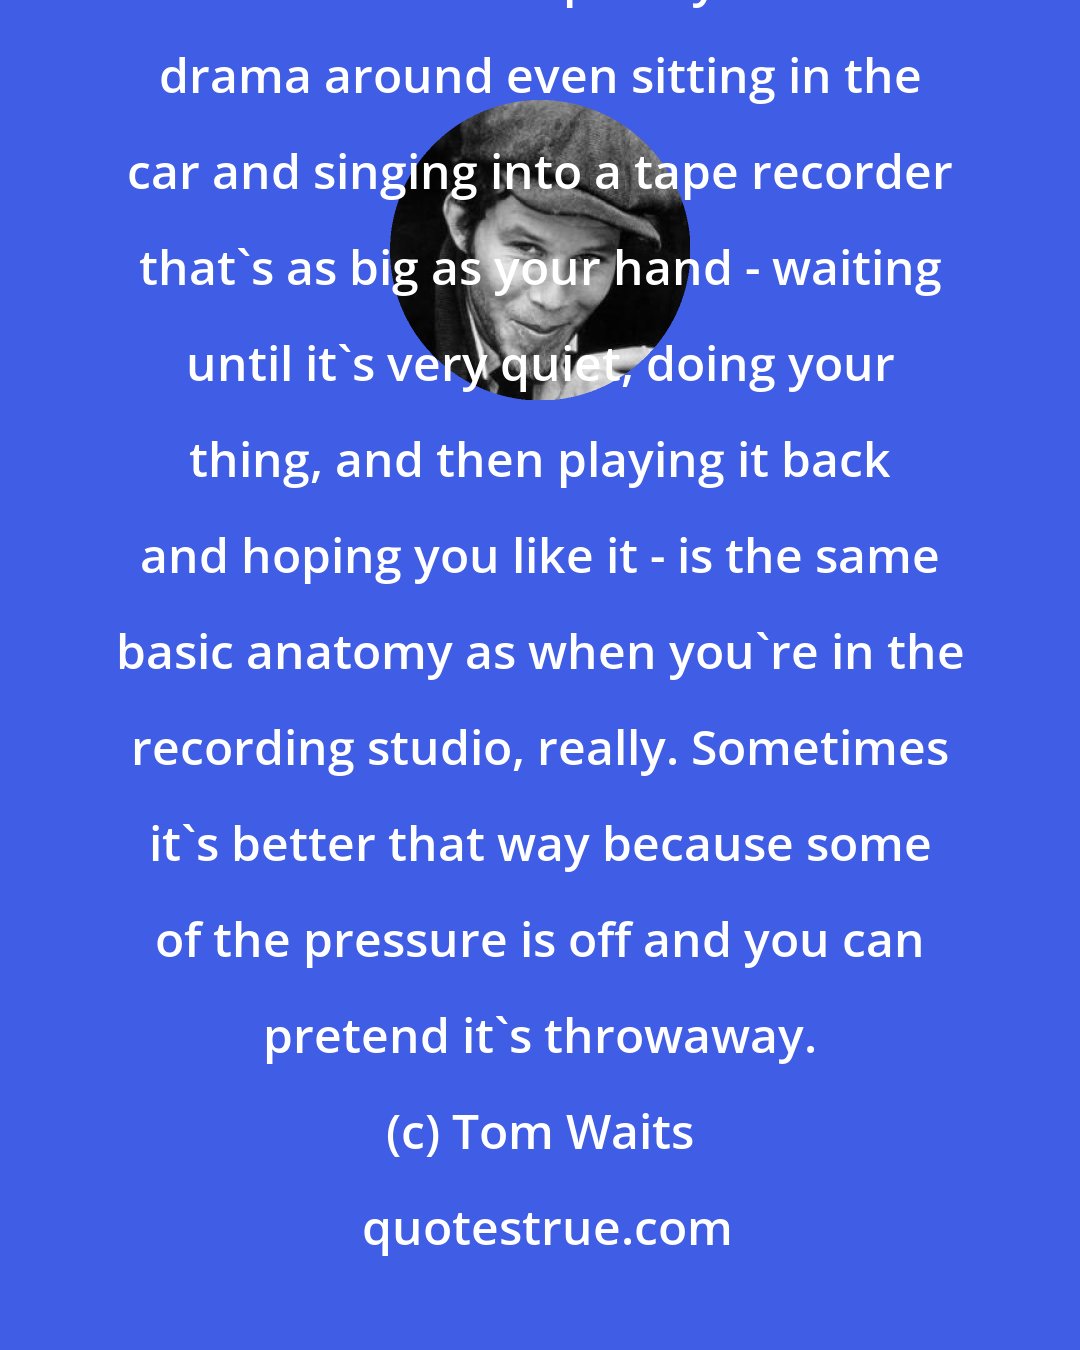 Tom Waits: If you are recording, you are recording. I don't believe there is such a thing as a demo or a temporary vocal. The drama around even sitting in the car and singing into a tape recorder that's as big as your hand - waiting until it's very quiet, doing your thing, and then playing it back and hoping you like it - is the same basic anatomy as when you're in the recording studio, really. Sometimes it's better that way because some of the pressure is off and you can pretend it's throwaway.